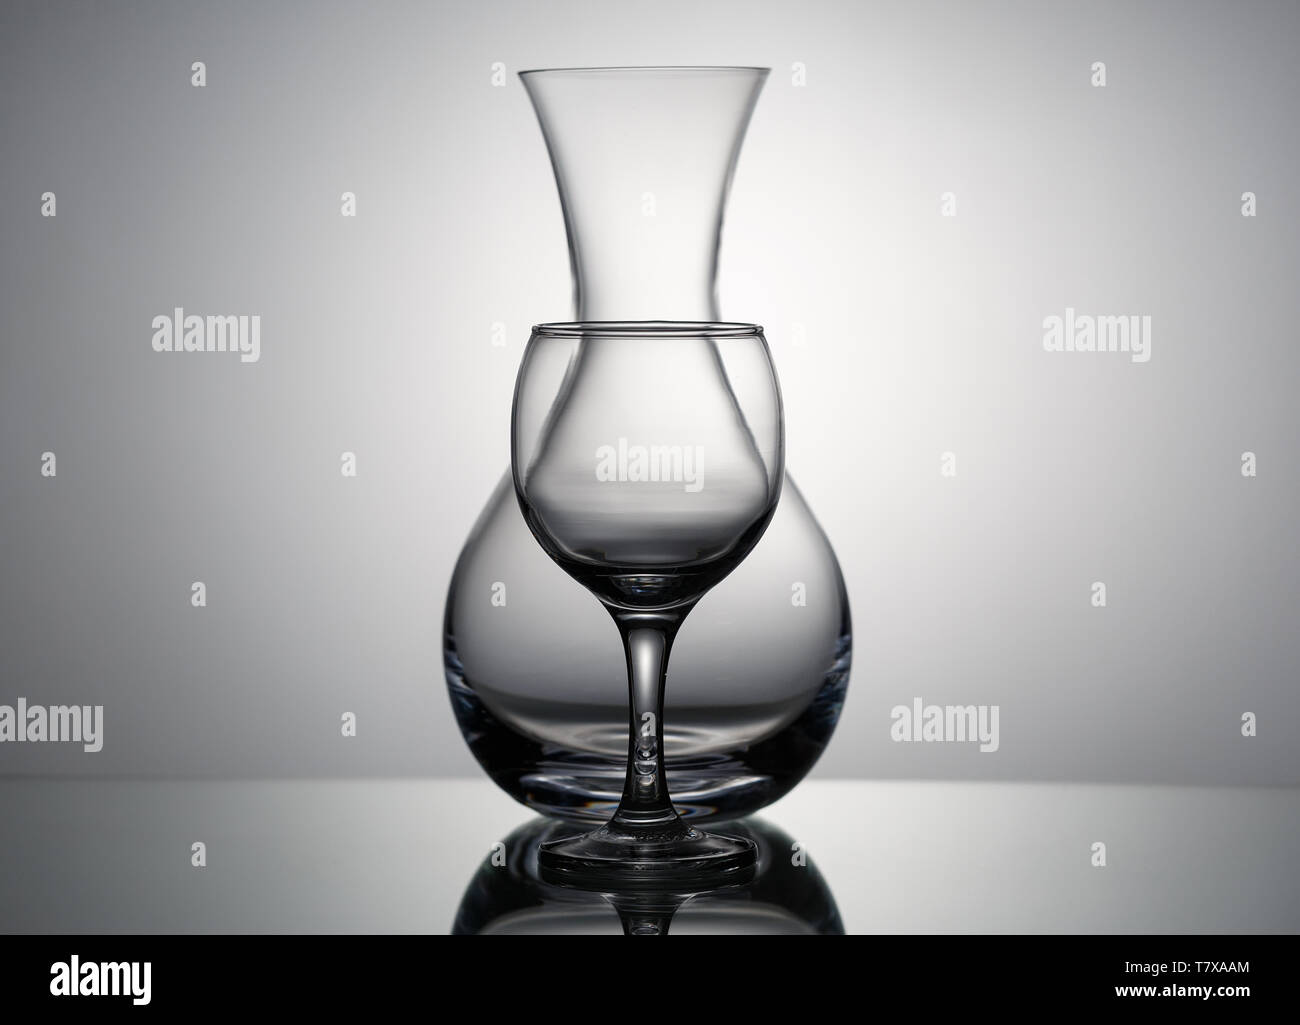 Pitcher and wine glass on grey background, silhouette on the lumen Stock Photo